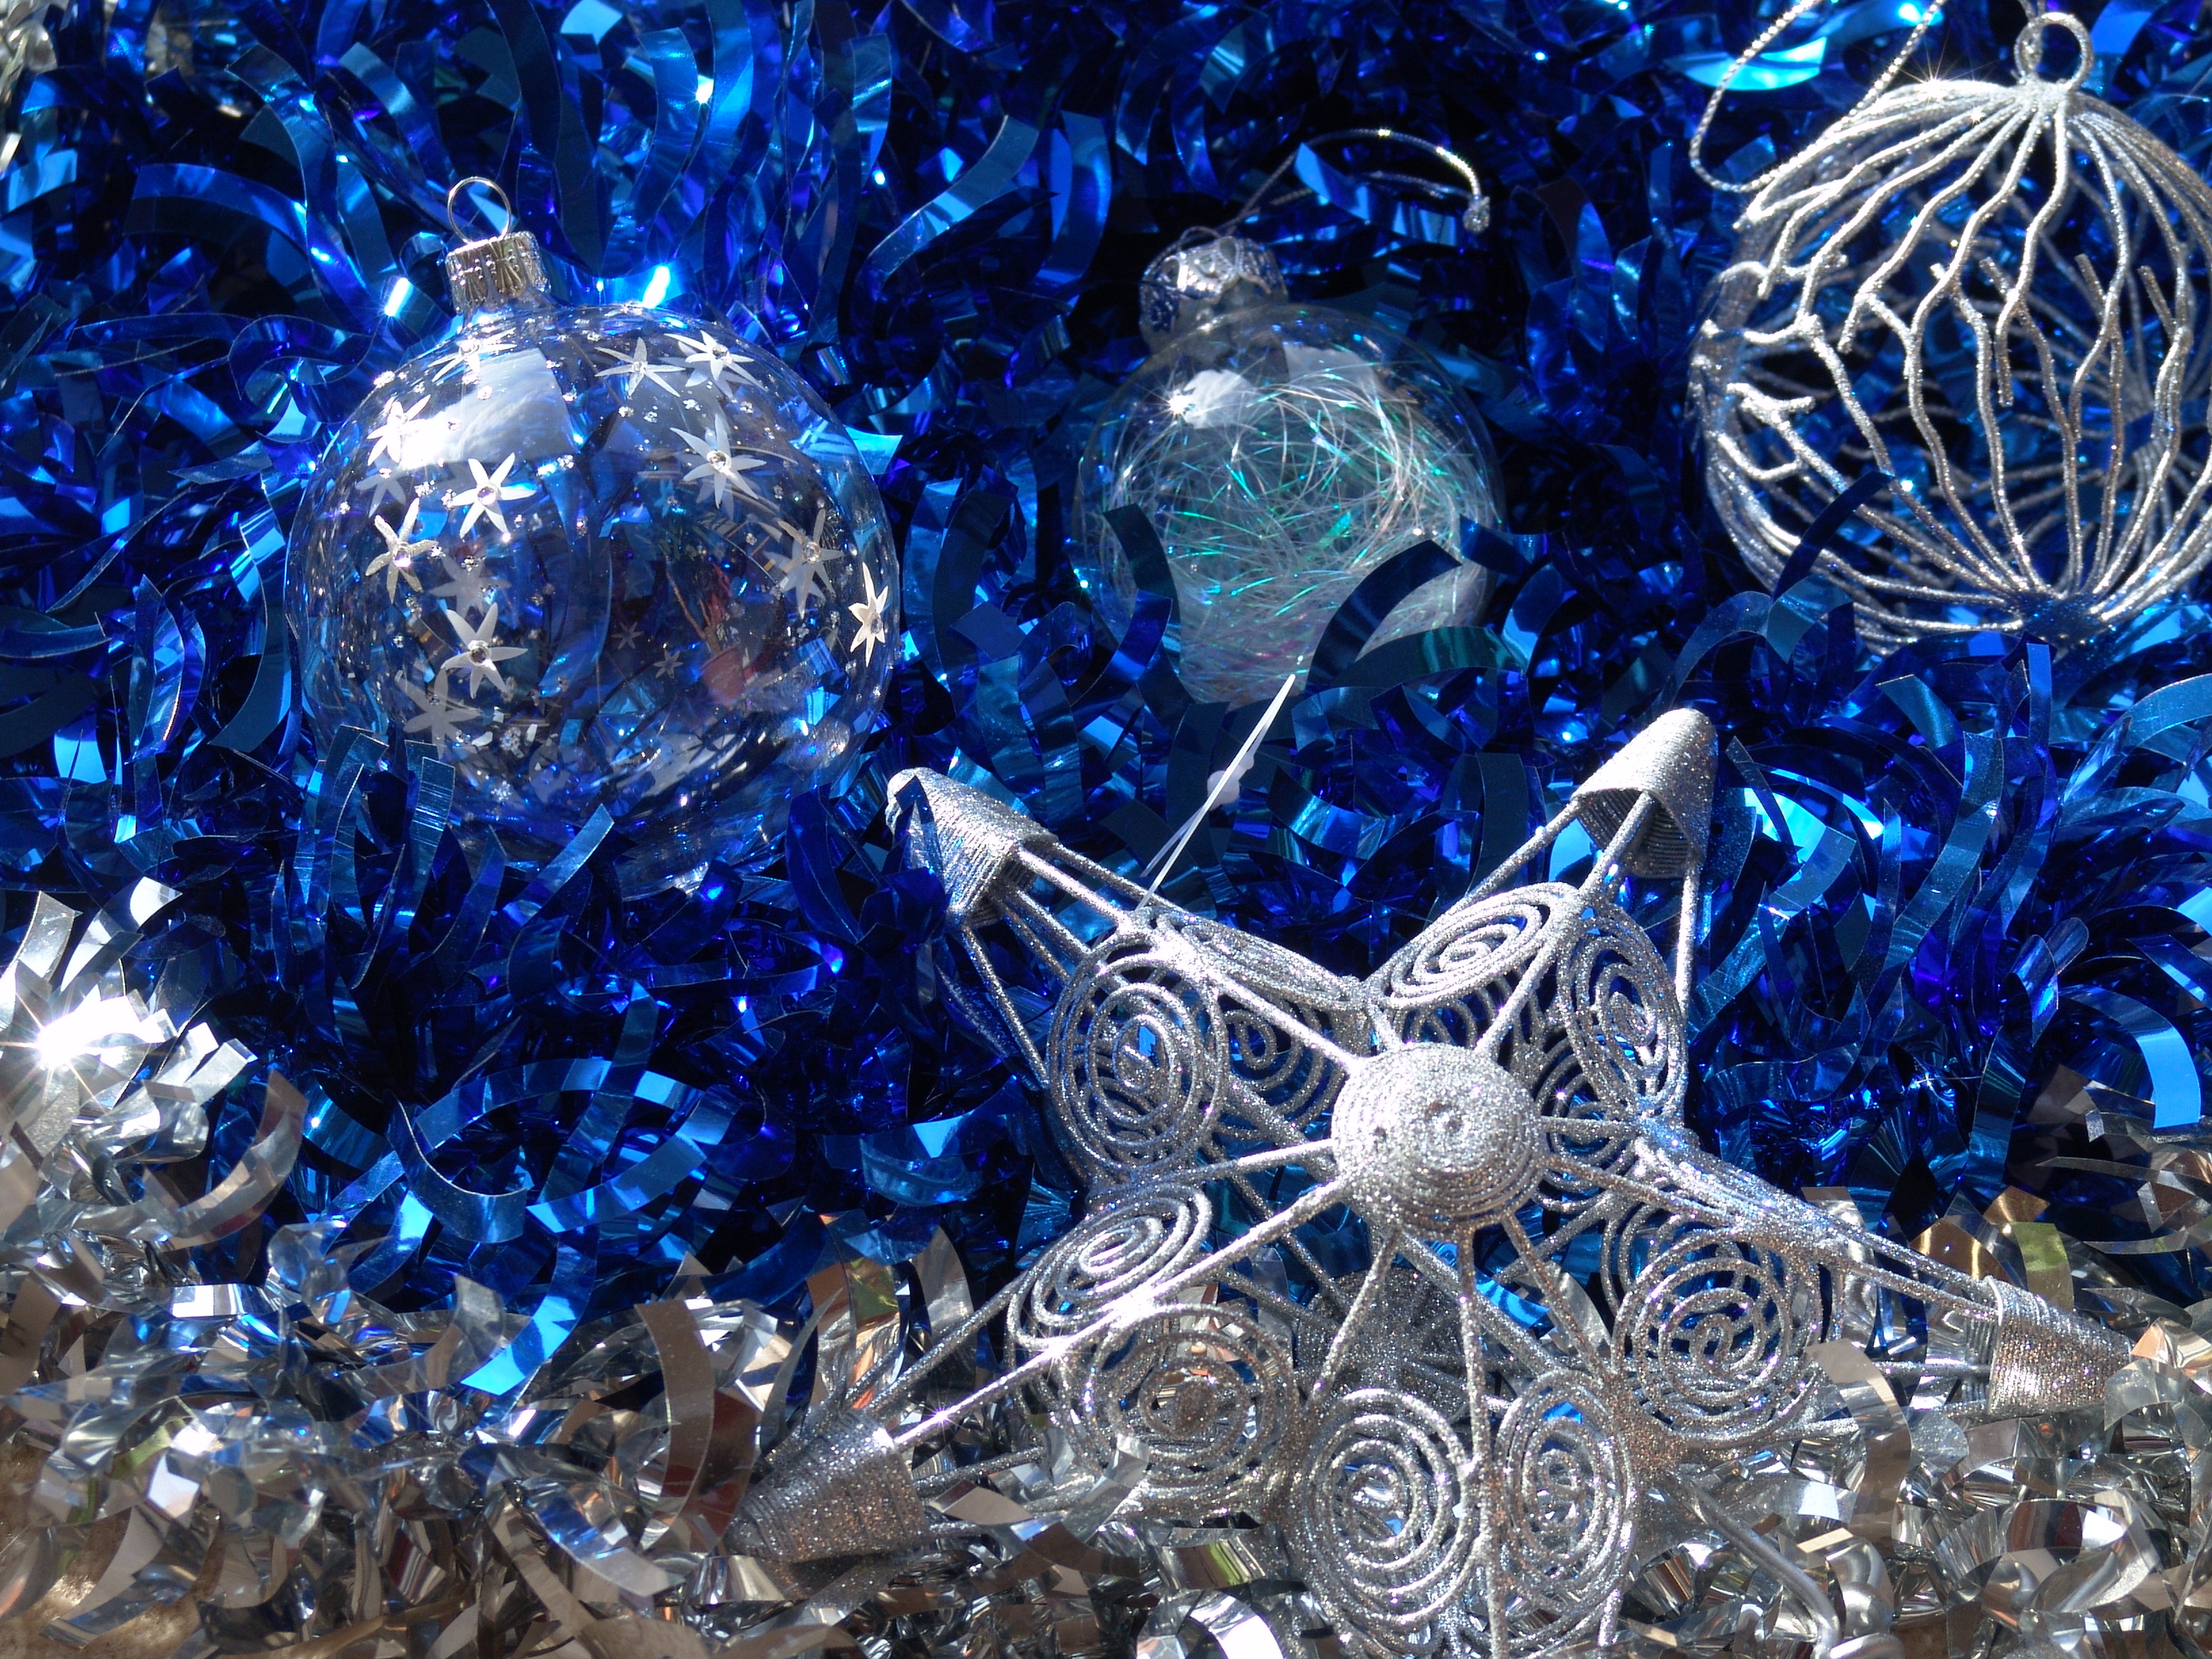 baubles-glass-and-wire-shiny-tinsel-blue-and-silver-star-for-top-of-tree-decorations-ornaments-JR.jpg